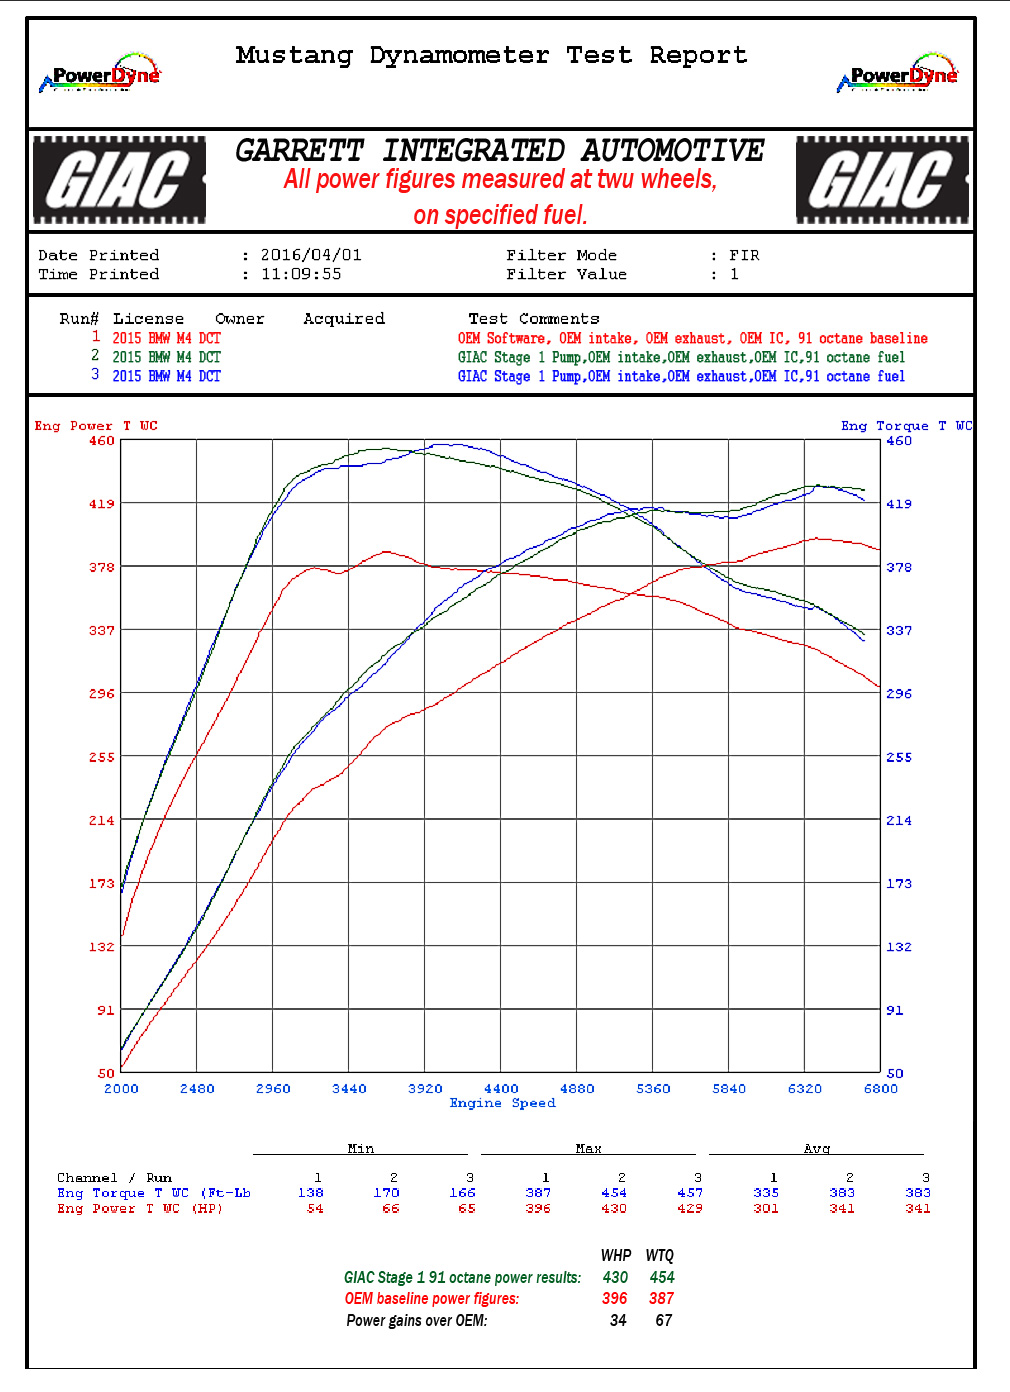 GIAC software is now available for S55 (turbocharged 3.0L inline-6 cylinder) engines found in BMW M3 and M4 models.  - GIAC dynoplot M4_stg1.jpg